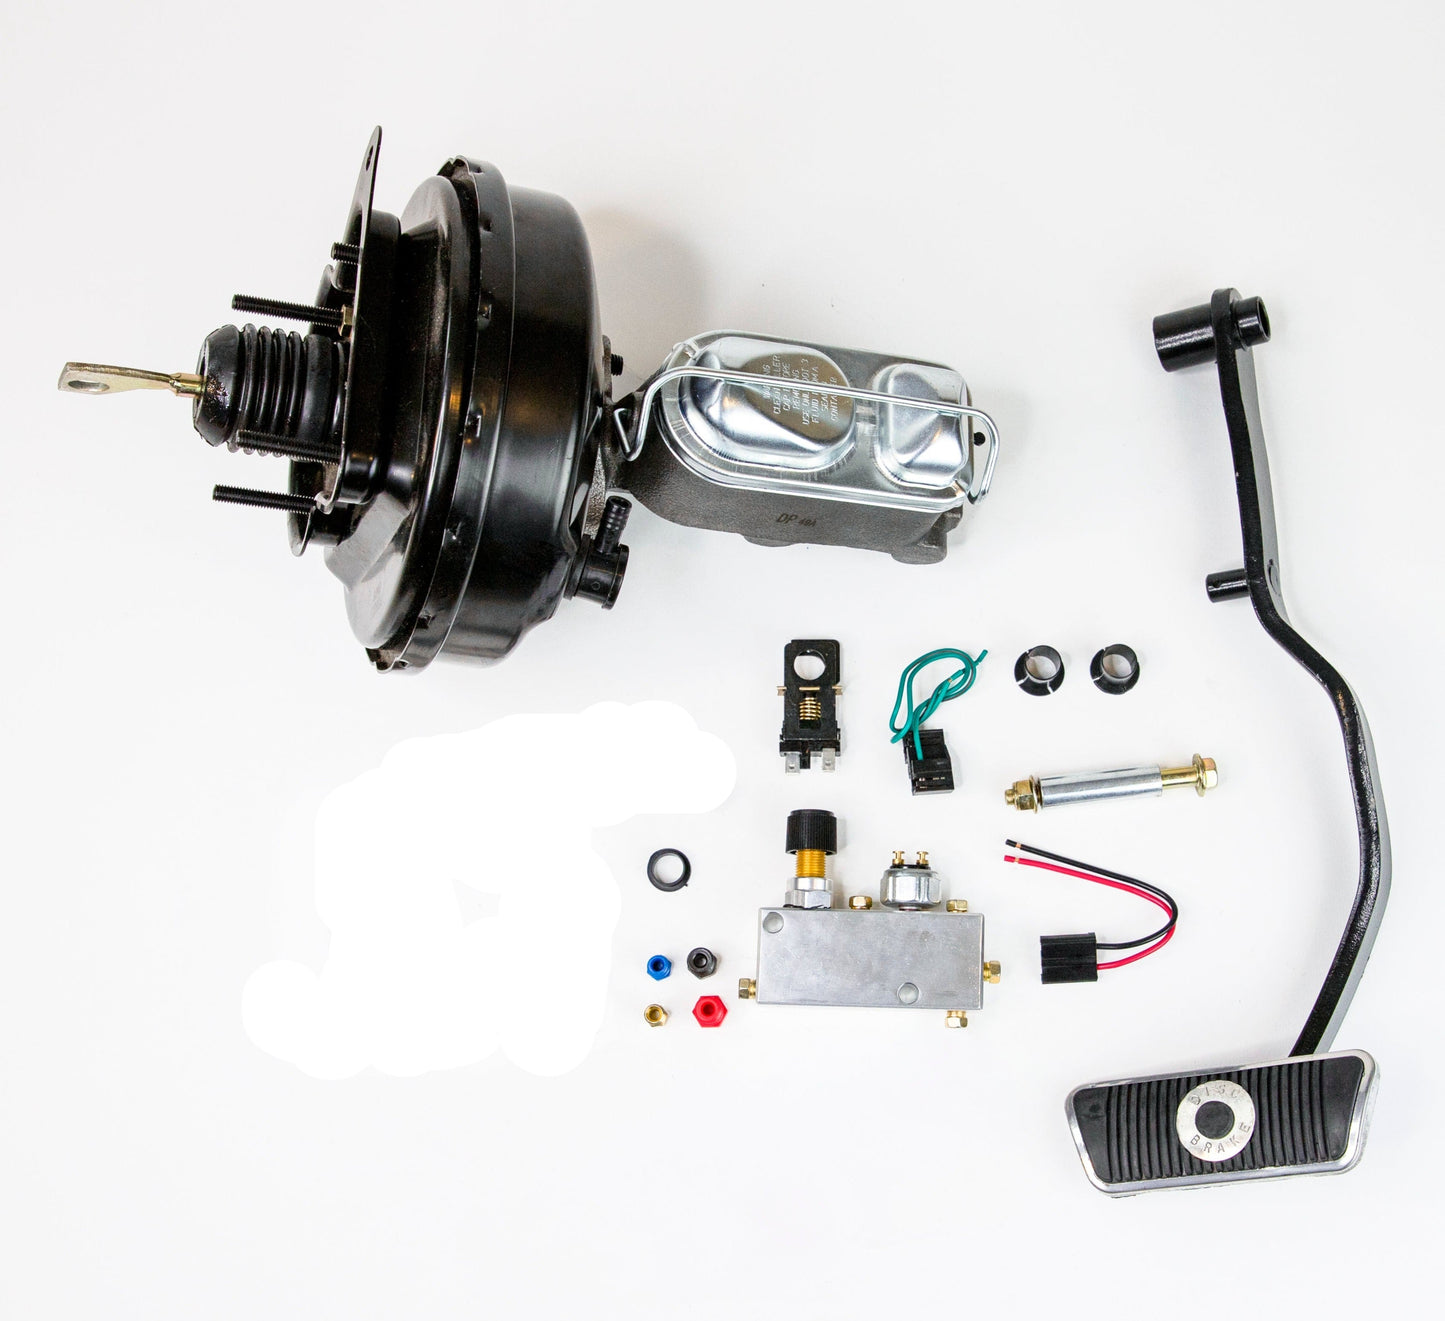 Power Brake Upgrade / Replacement for an Automatic Transmission 67-70 Mustang or Cougar on a Front Wheel Disc Brake Car